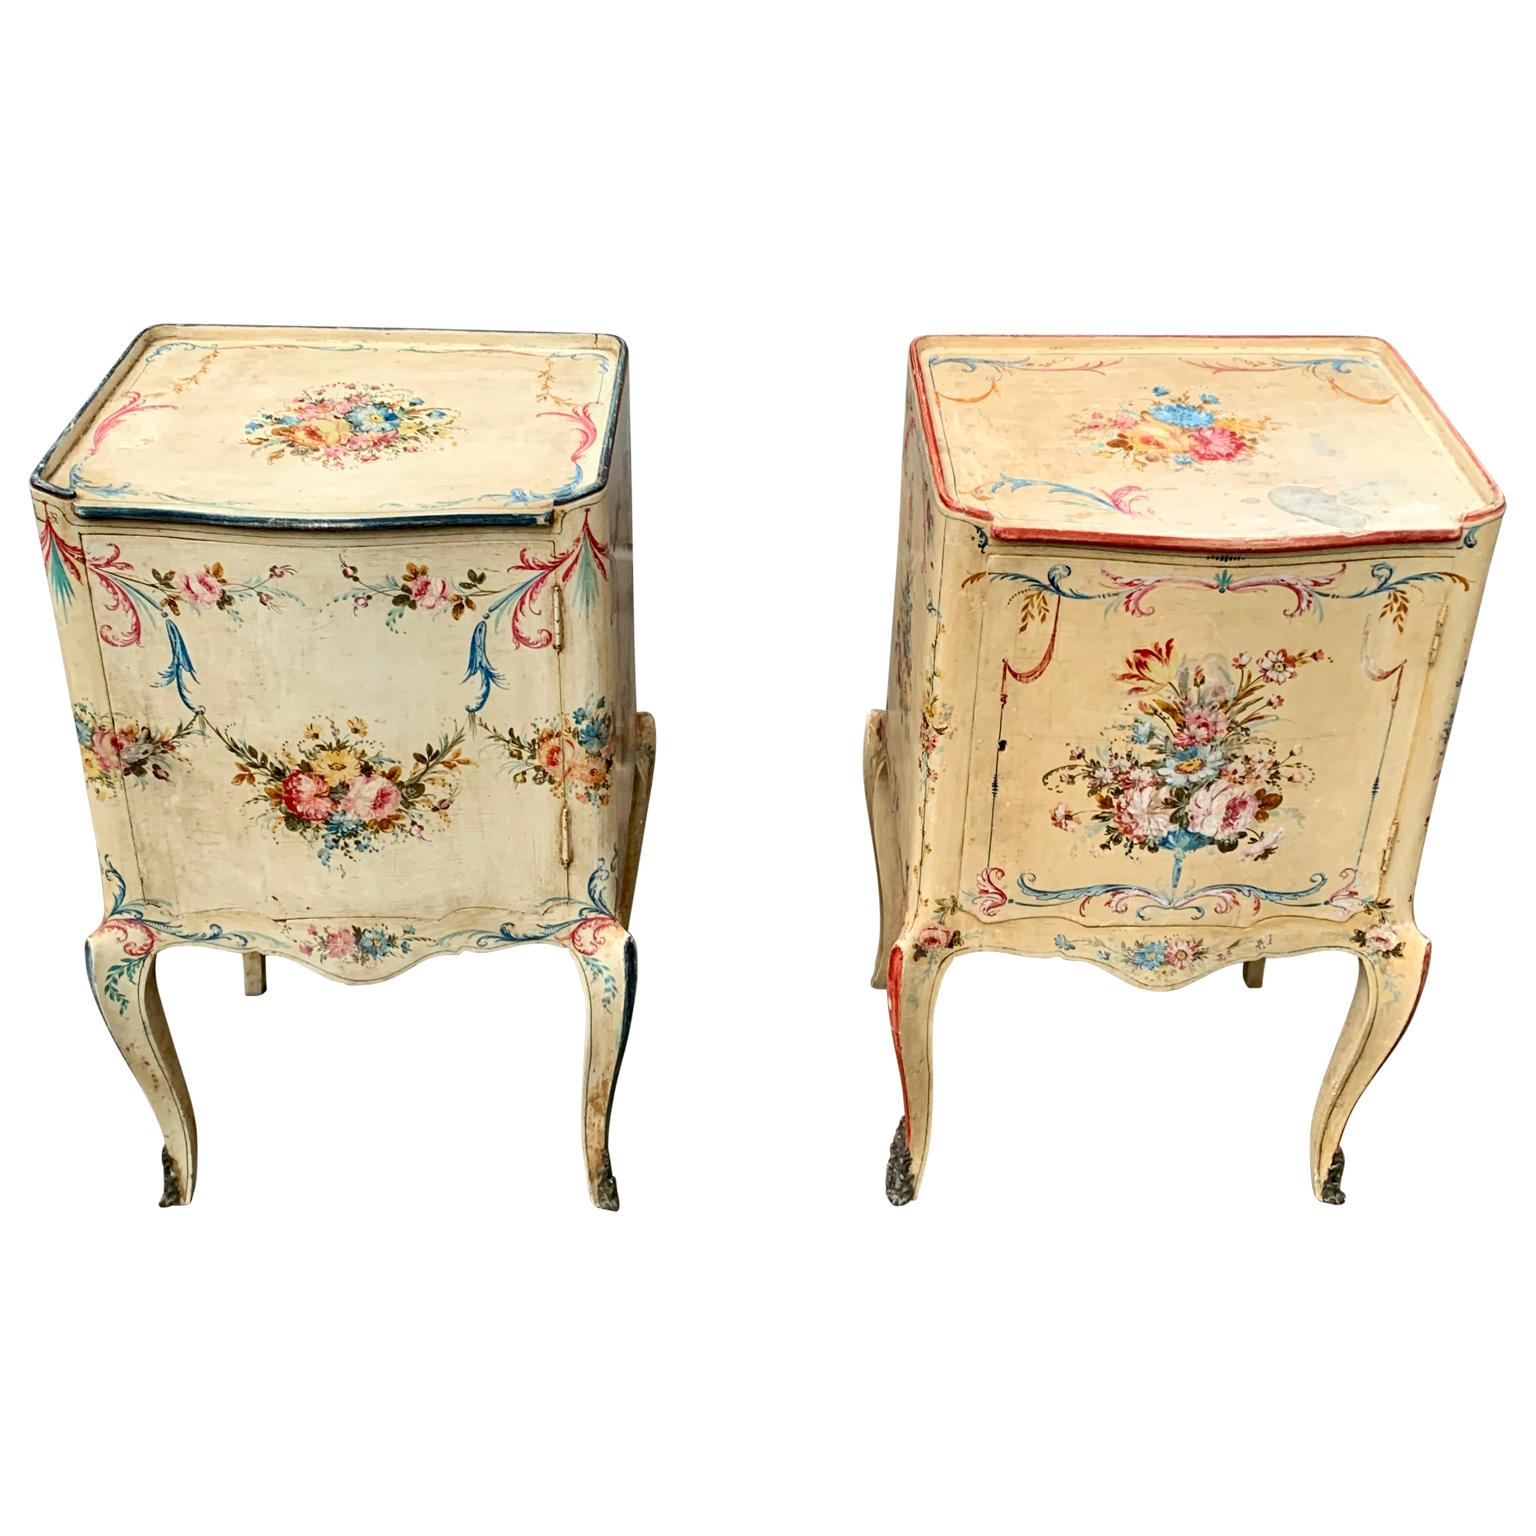 A pair of Italian Mid-Century hand-painted nightstands or small chest of drawers in solid oak wood in Venetian style. These vintage highly hand decorated night-tables or small chest of drawers has each five small drawers inside that can be used as